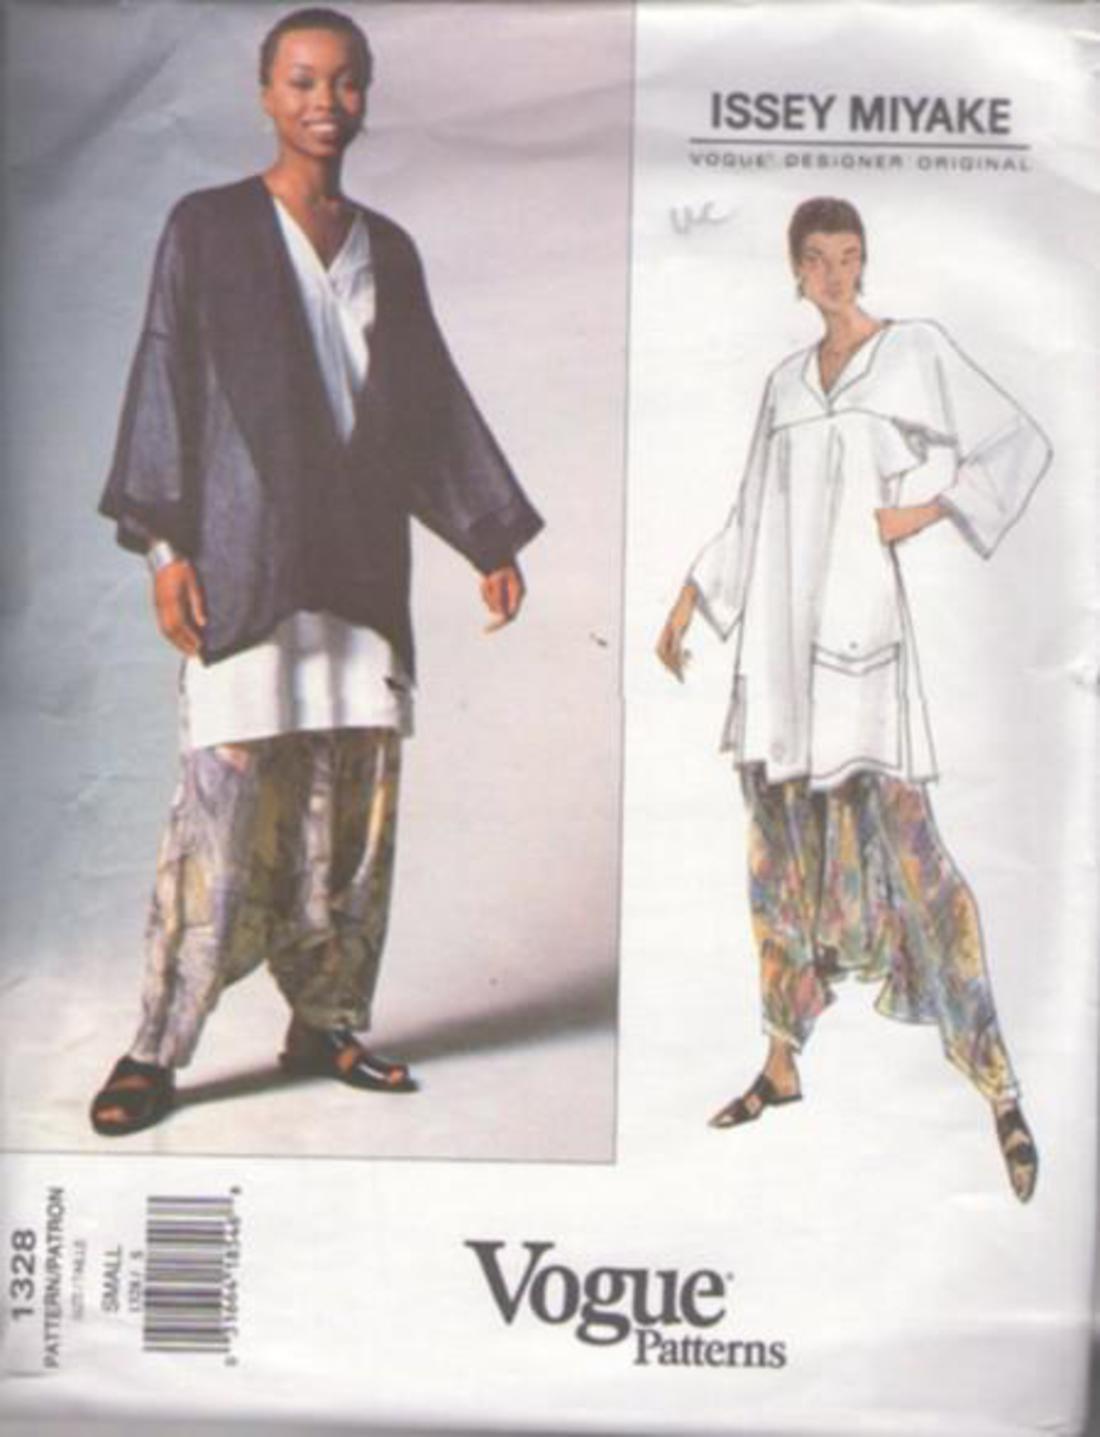 Vogue Pattern 10868 Sz 16-24 Tunic Top Blouse 2 Styles Issey Miyake Inspired NEW 